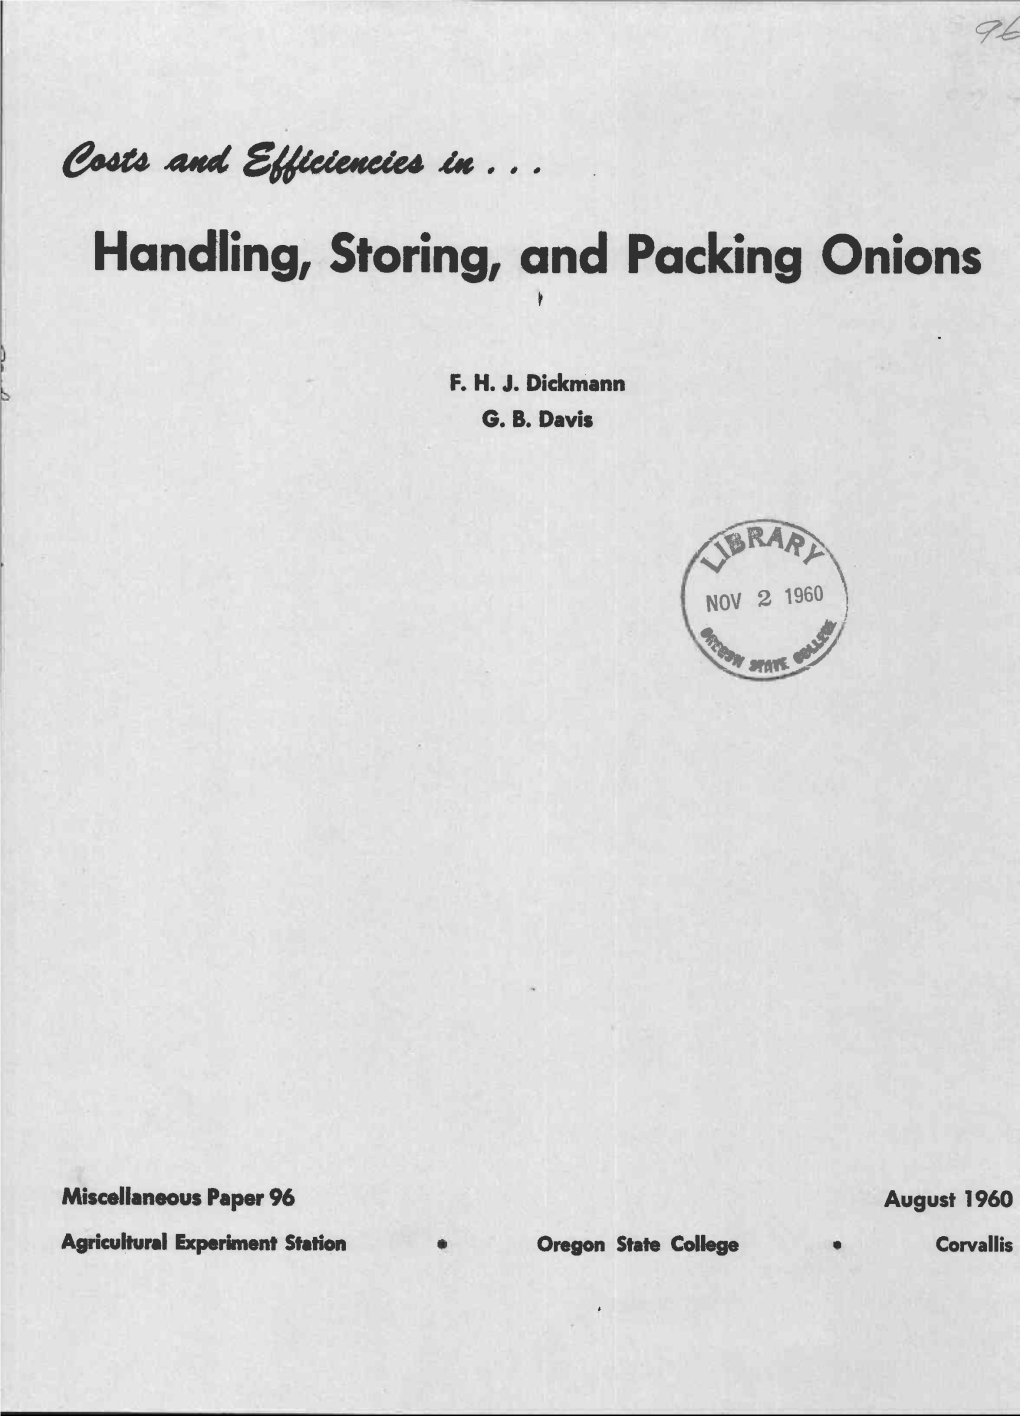 Handling, Storing, and Packing Onions